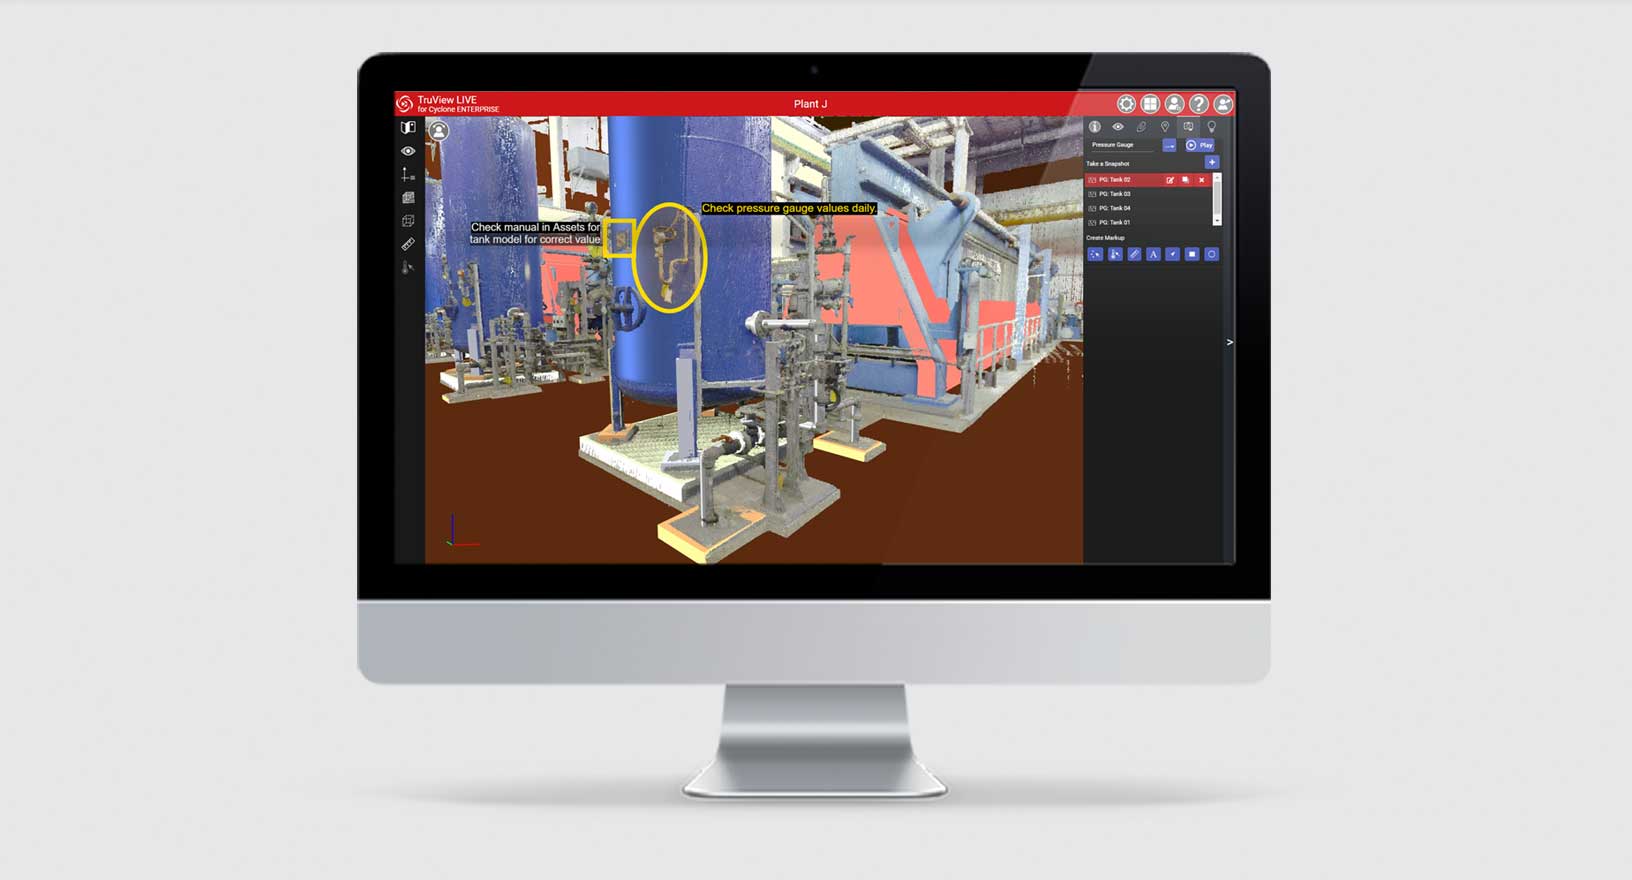 3D model of pipes inside a large plant displayed online using reality capture browser software 